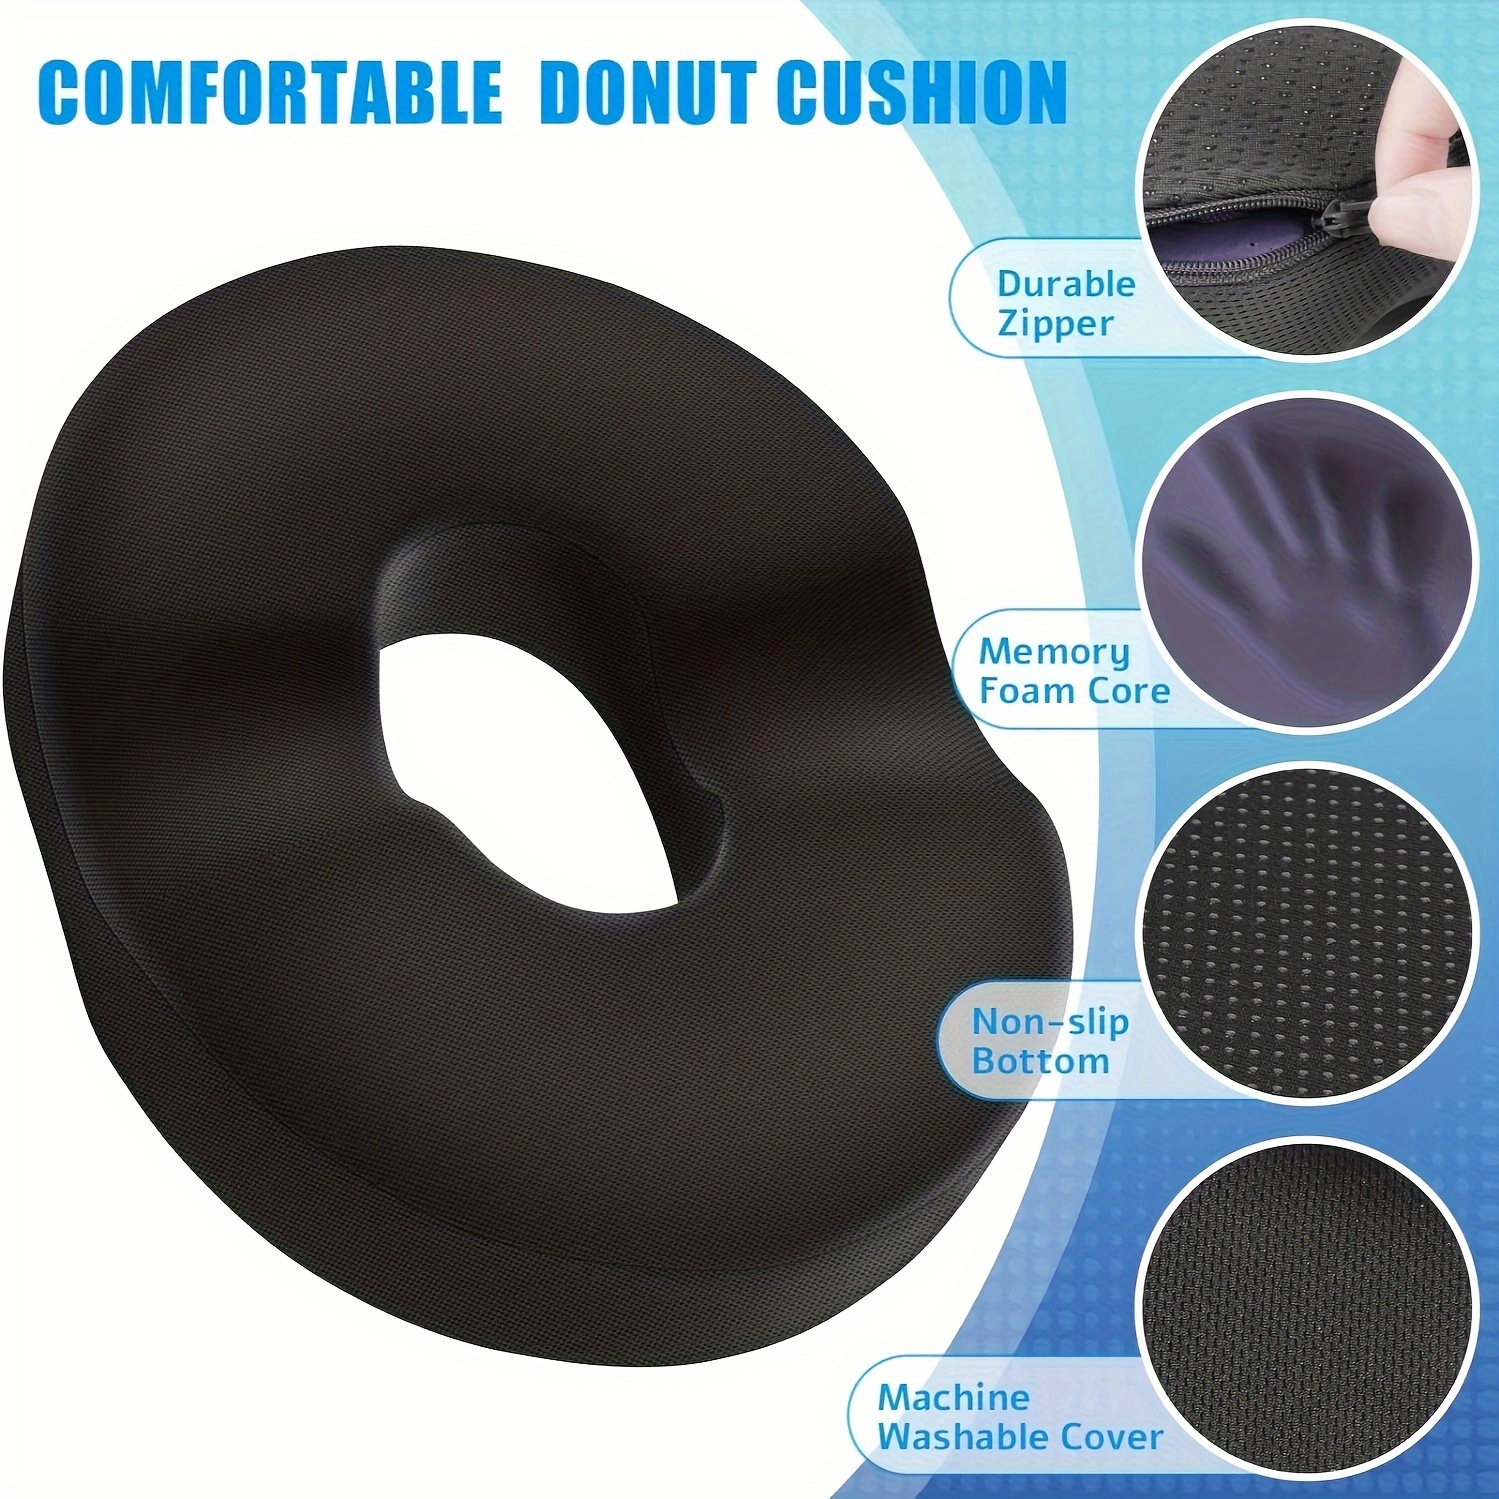 Donut Pillow Tailbone Pain Relief Memory Foam Seat Cushion for Pregnancy  Coccyx